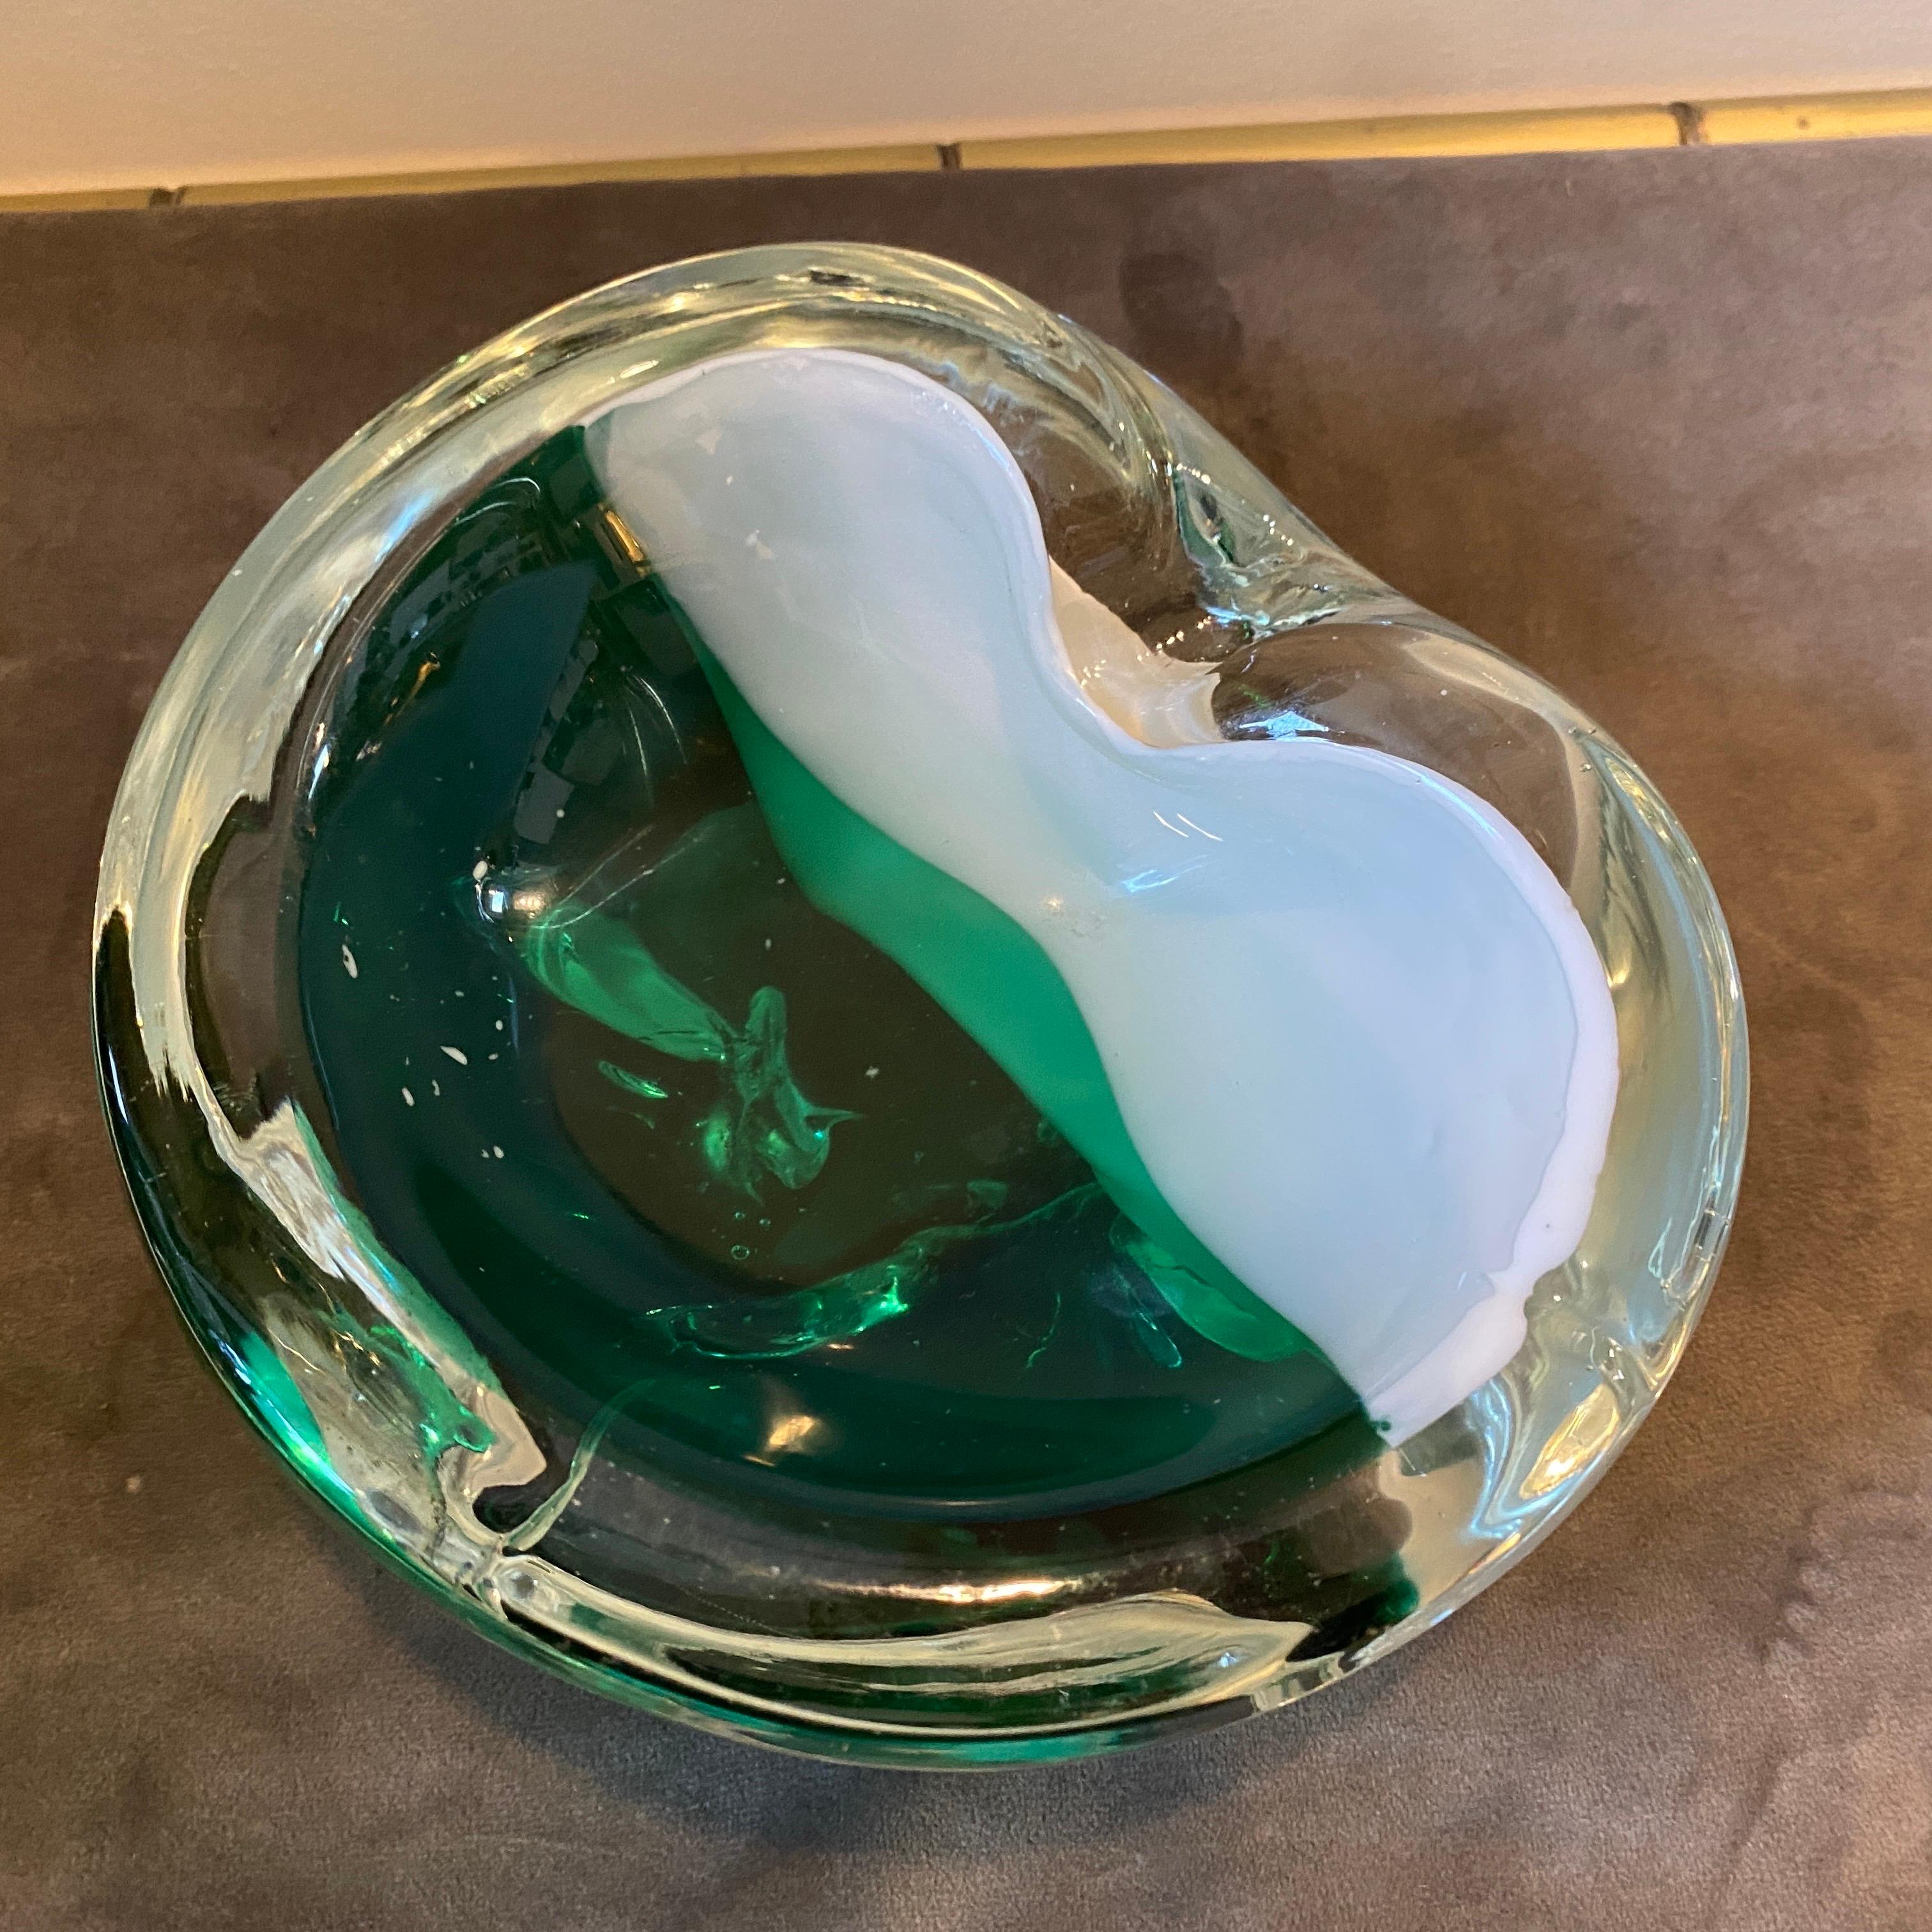 A green and white murano glass ashtray or bowl attributed to Carlo Moretti. Item it's in perfect condition and designed and manufactured in Venice in The Seventies.